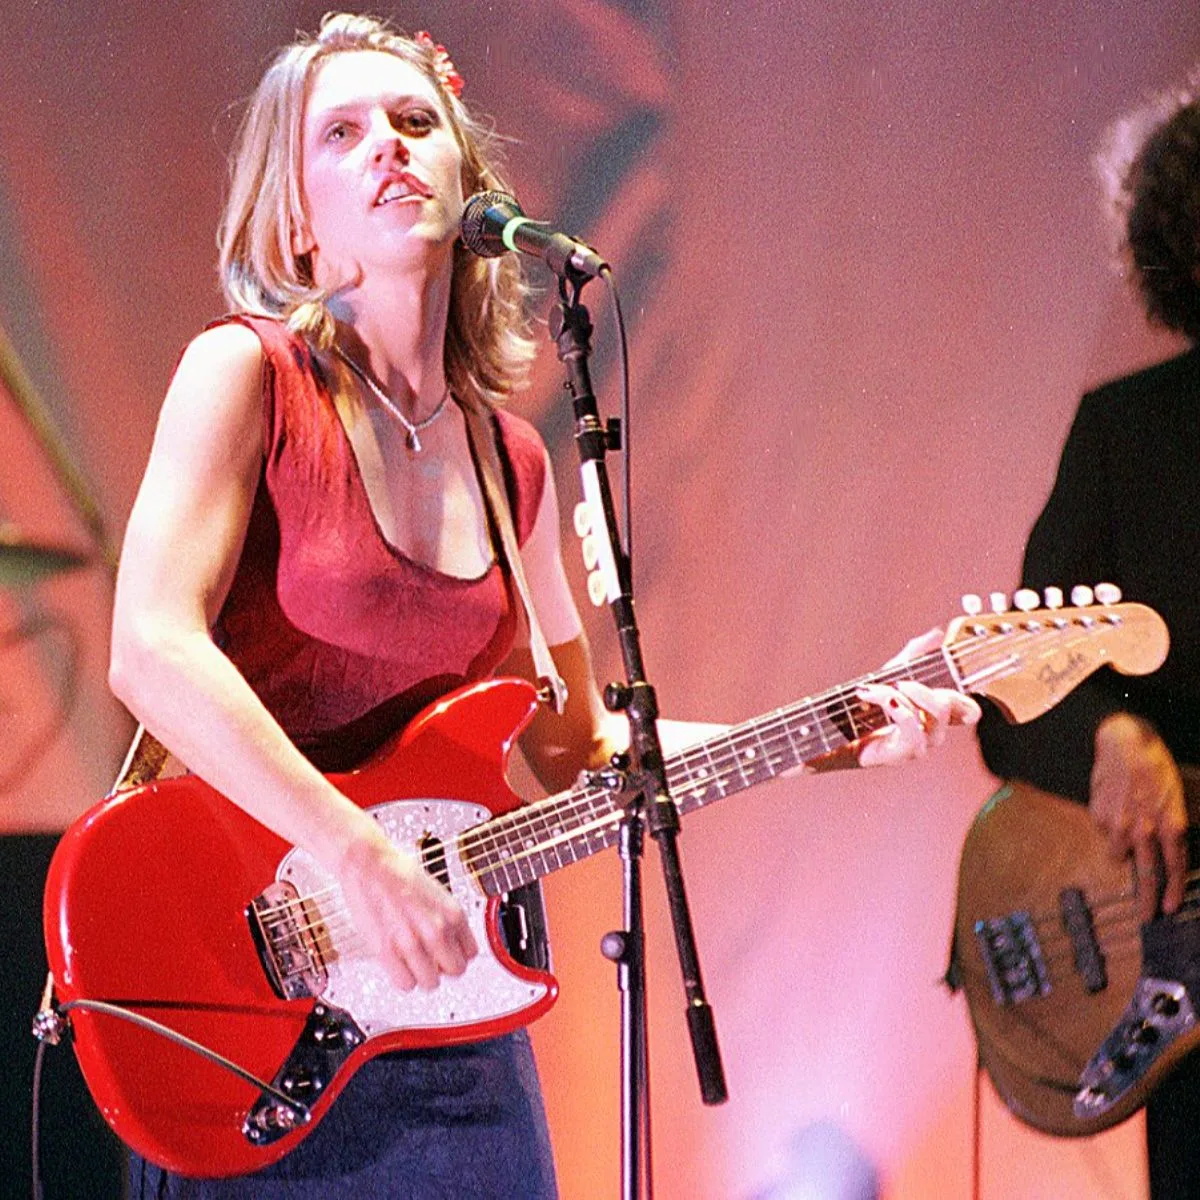 How old is Liz Phair